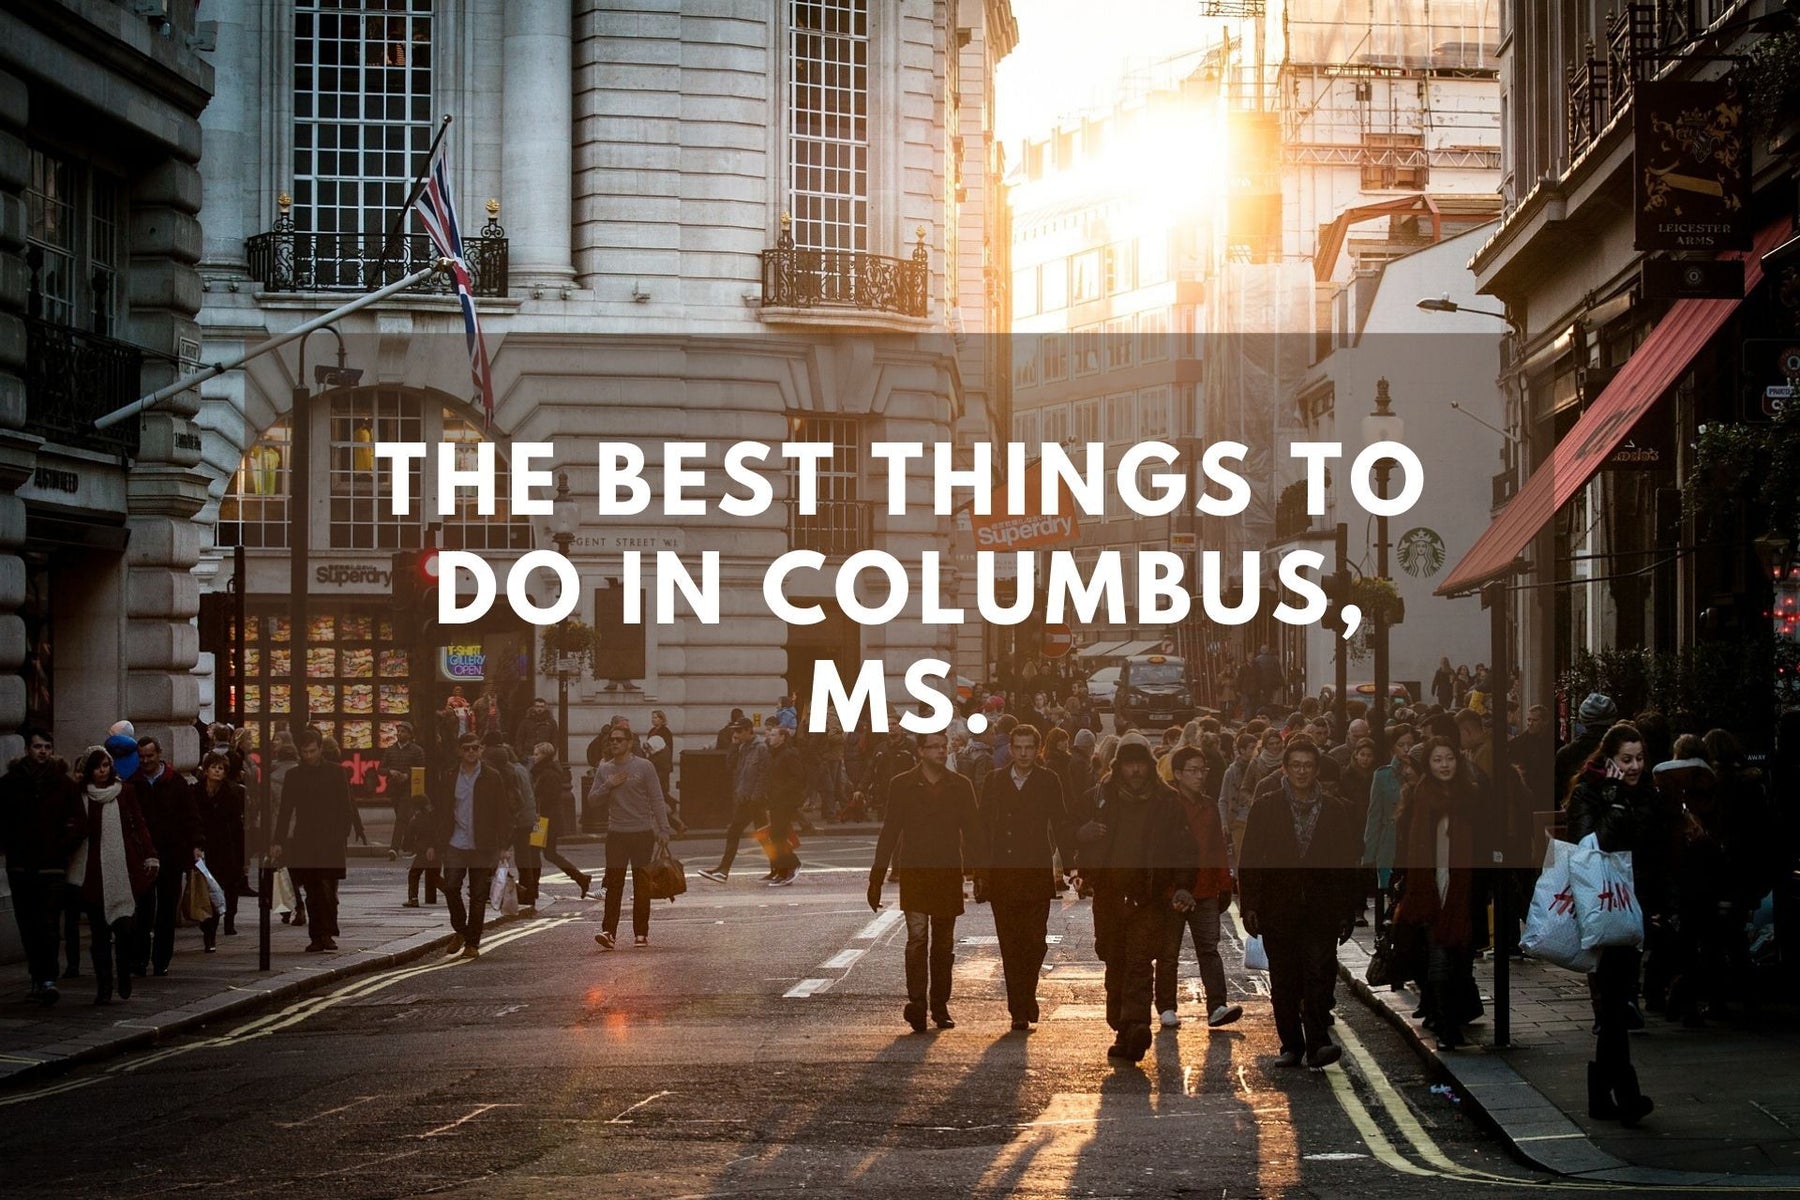 Pedestrian - The Best Things to Do in Columbus, MS